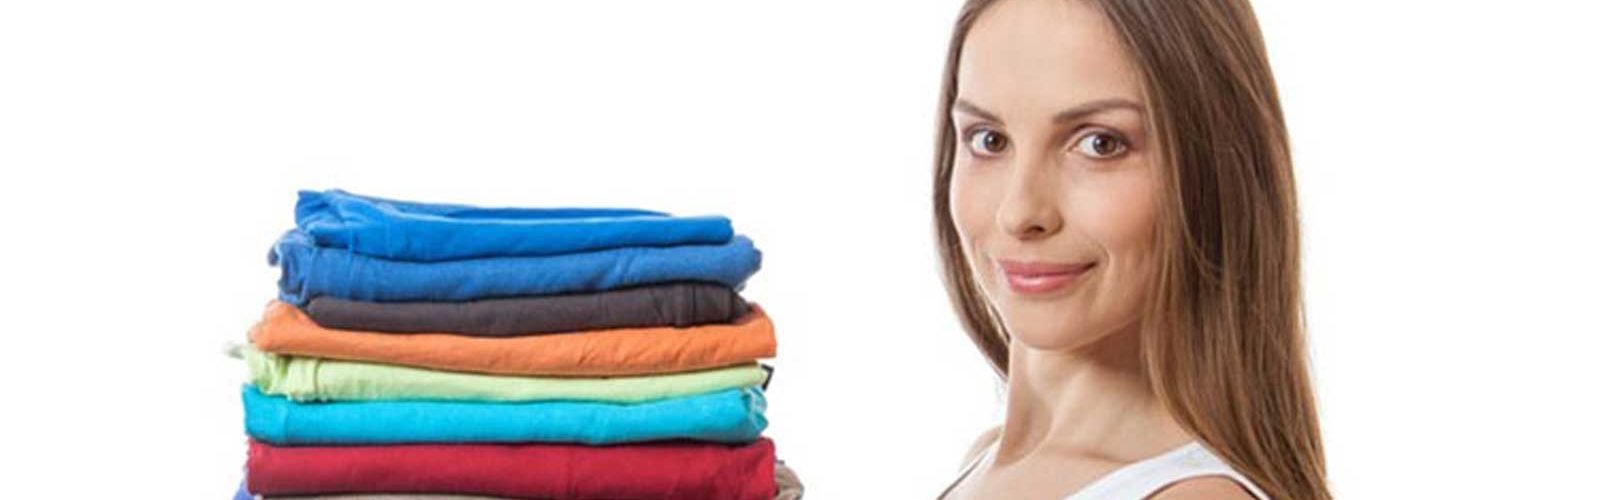 wash and fold laundry service